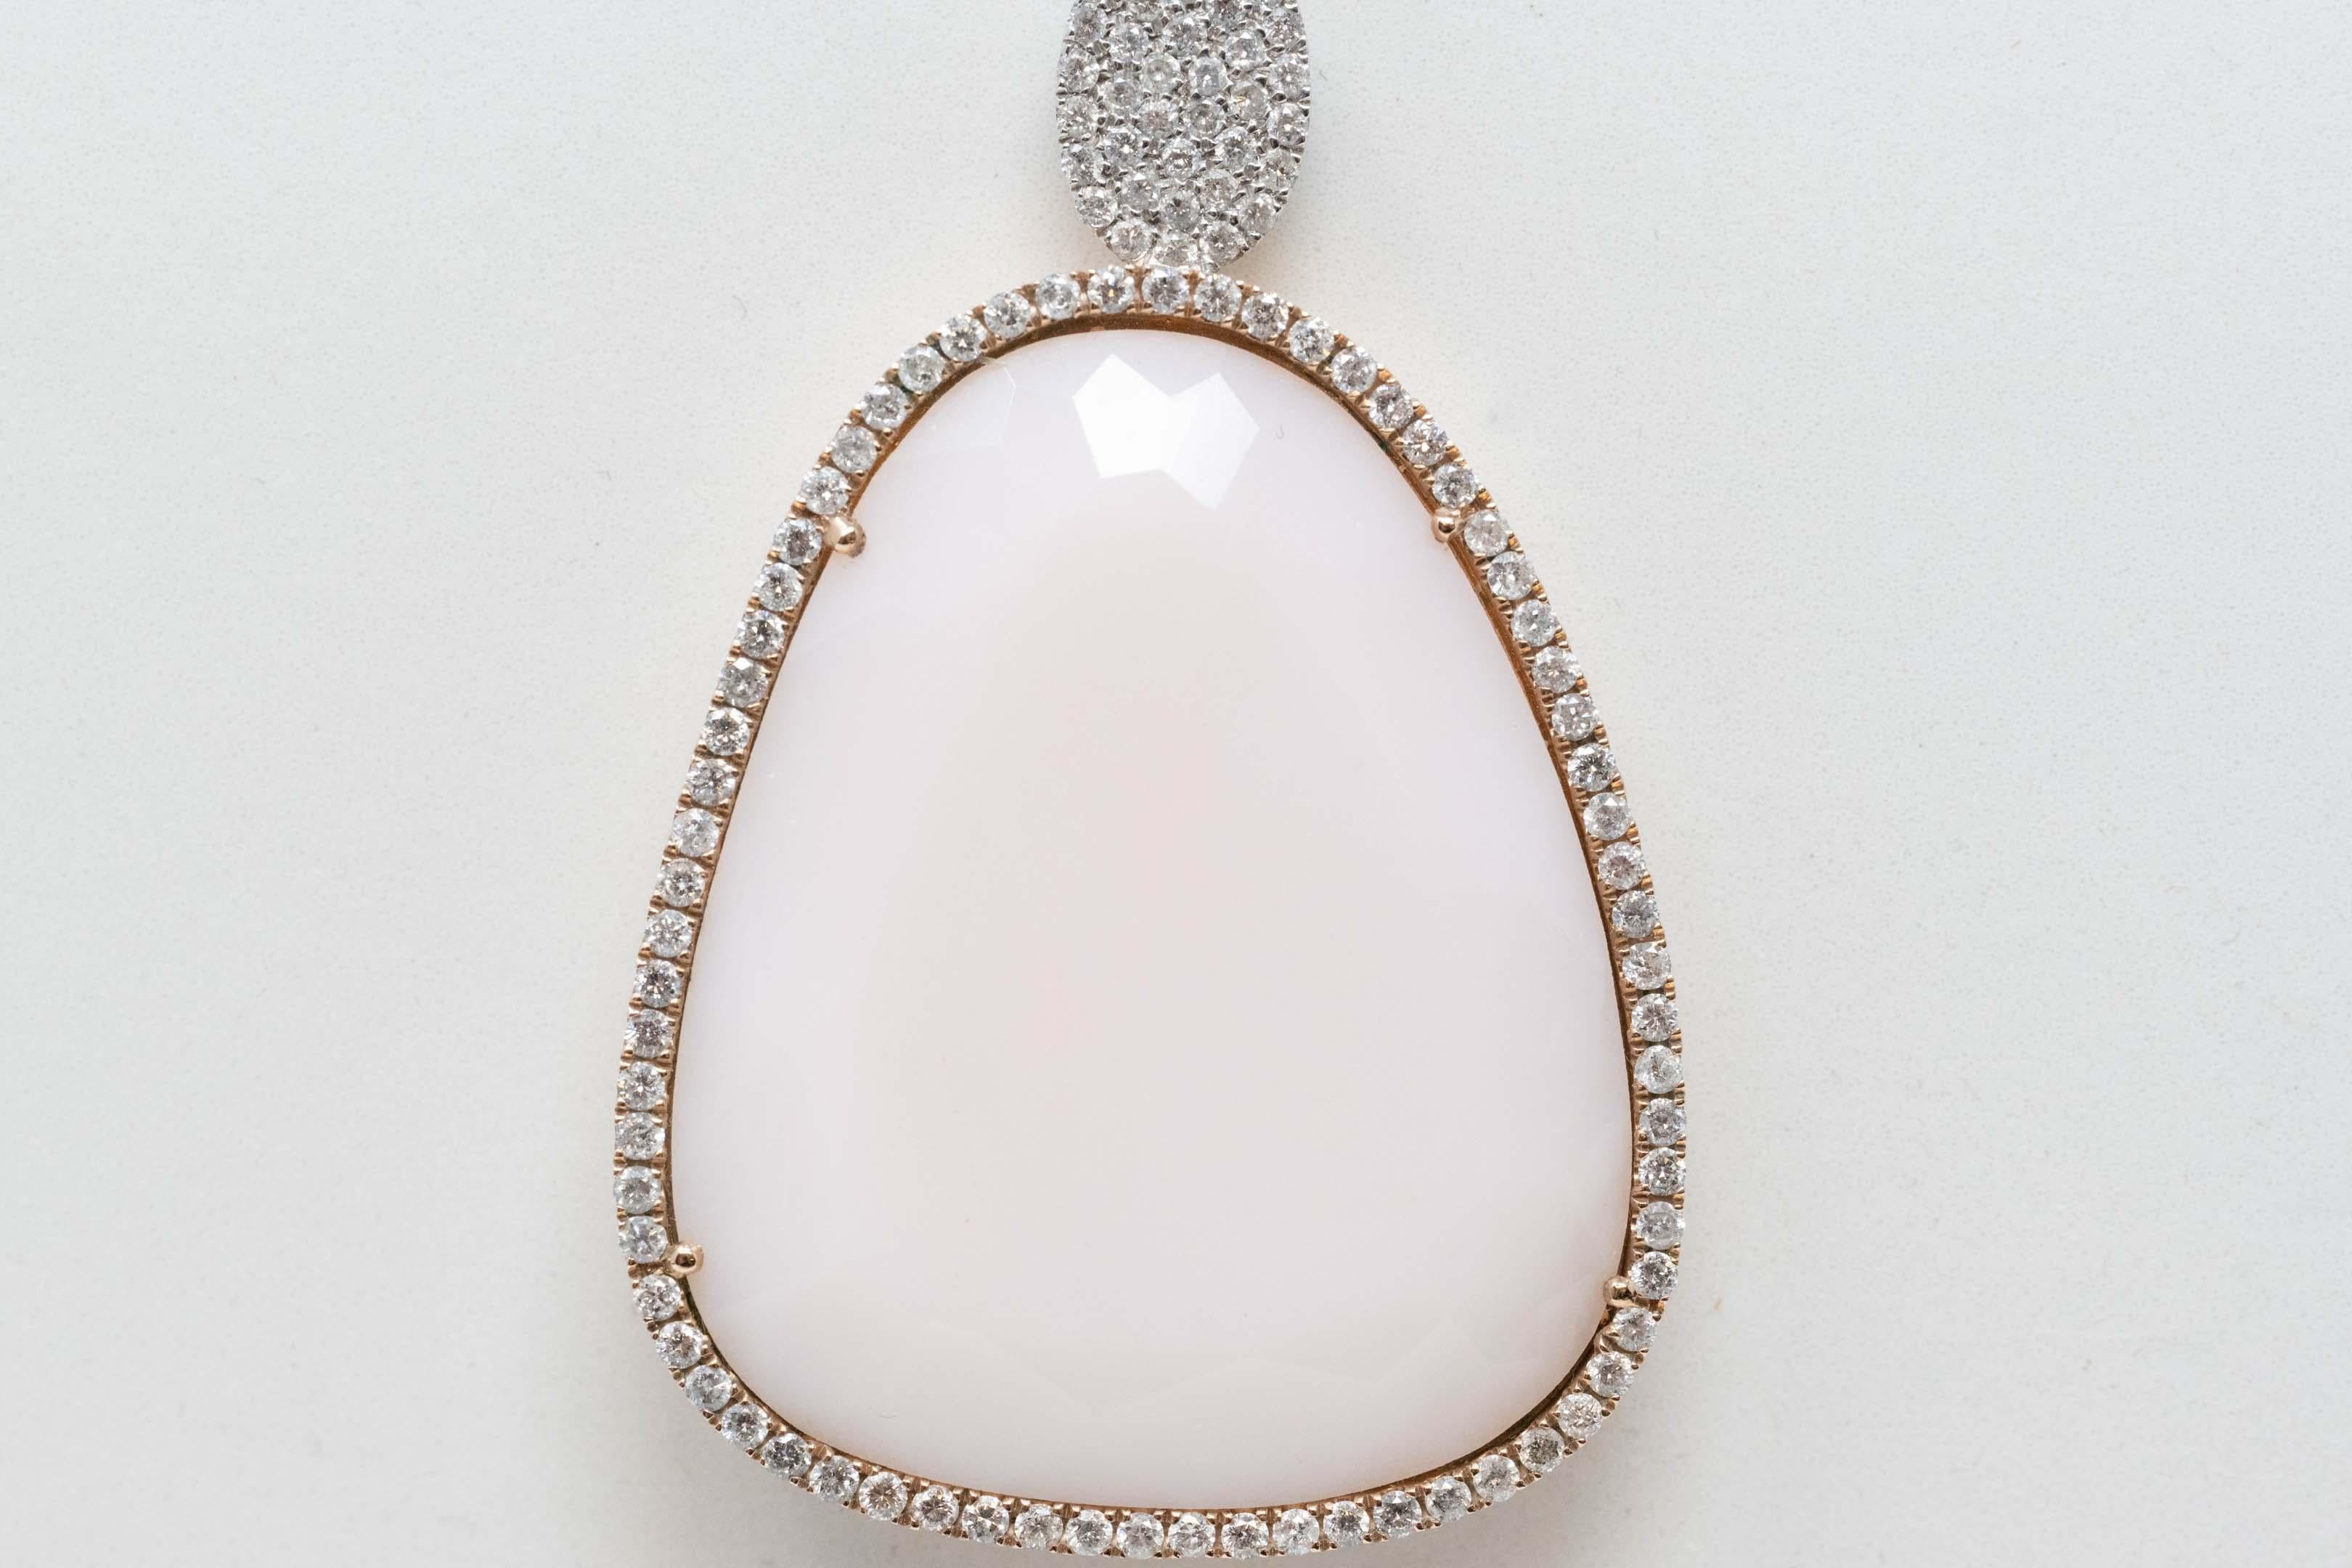 14k gold, pink opal and diamond pendant necklace. The chain measures 16 inches long, the pendant 40mm x 26mm. Set with 107 diamonds and a light pink opal stone. Mark and maker mark are on the tag. In good condition.